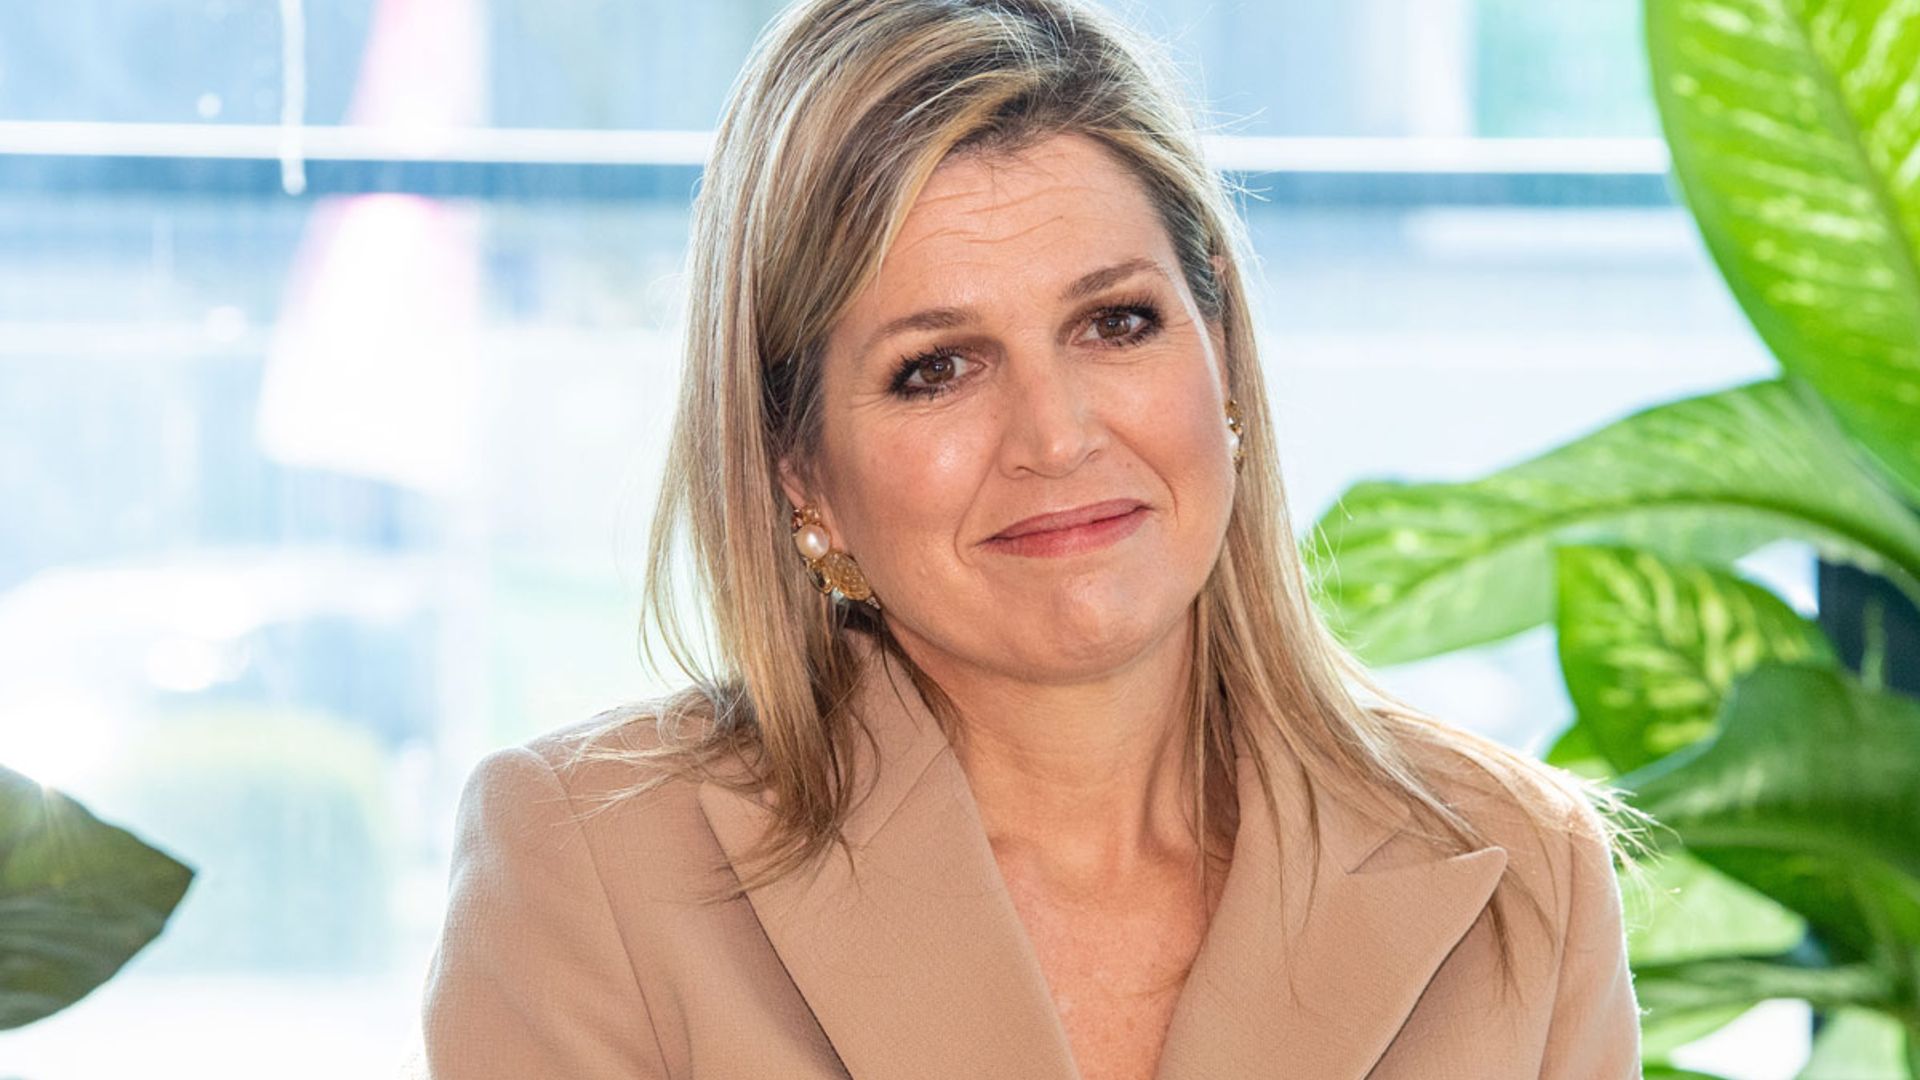 Queen Maxima surprises with royal engagement amid coronavirus - and her waist-cinching suit is beautiful